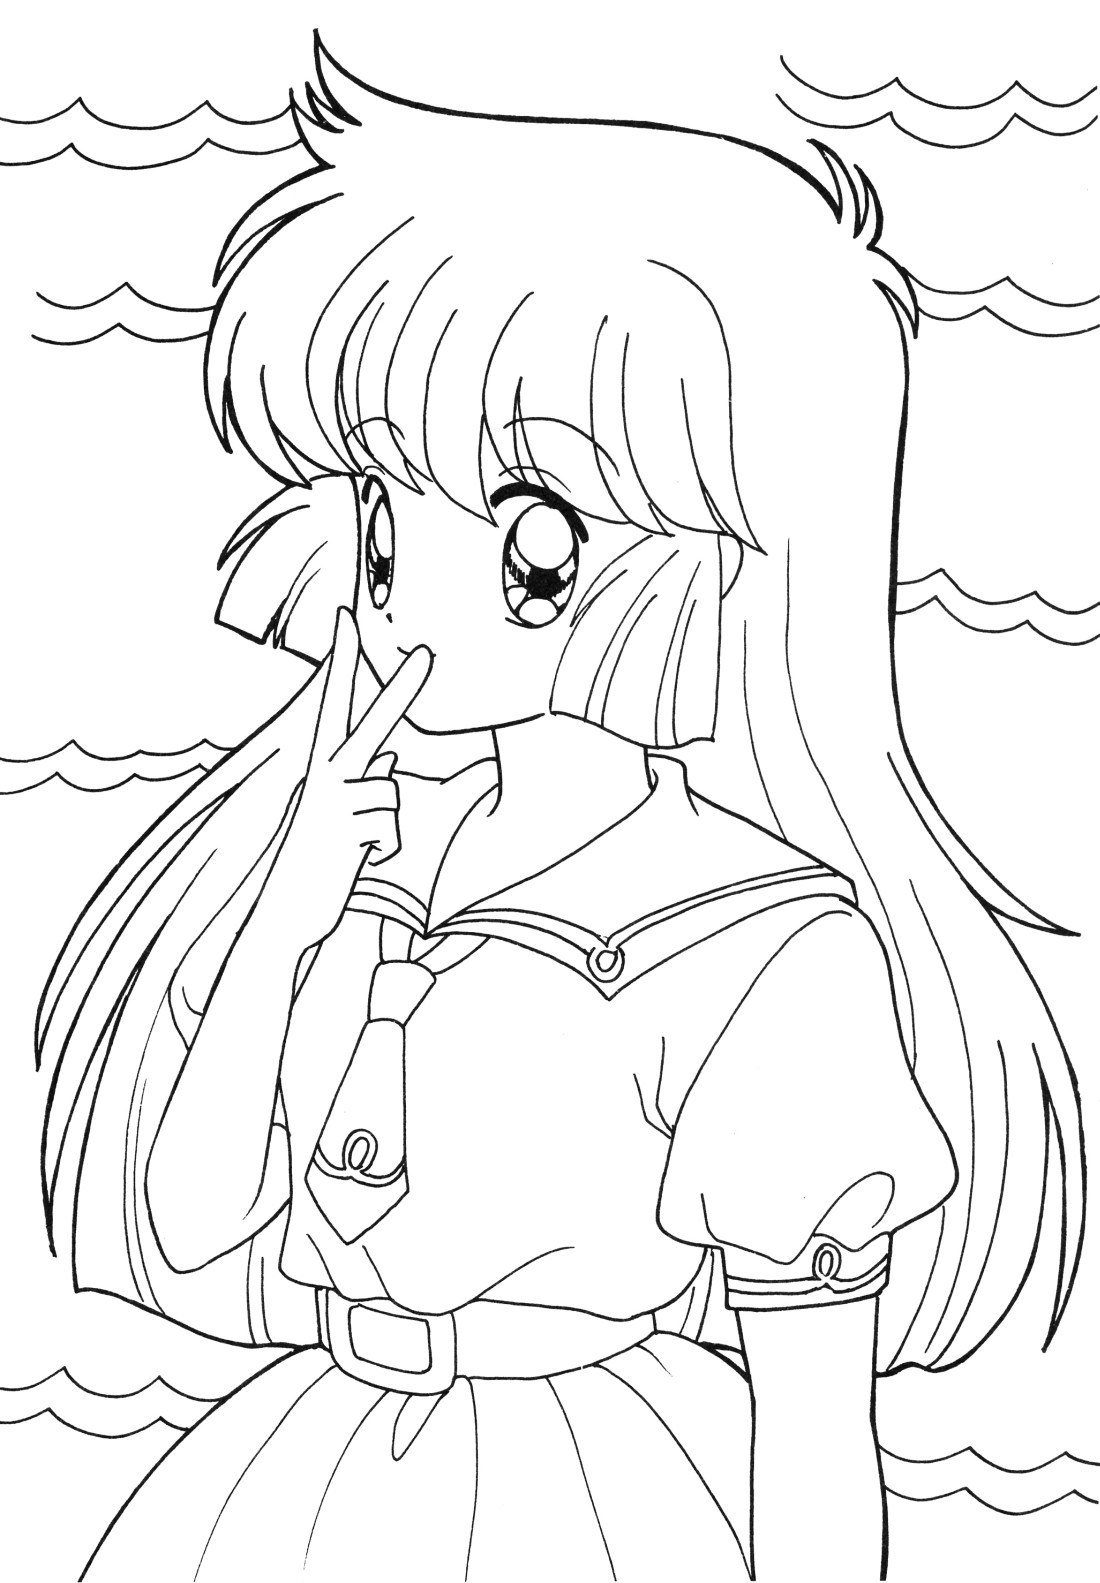 Cute Anime Girls Coloring Pages
 Anime Coloring Pages Best Coloring Pages For Kids